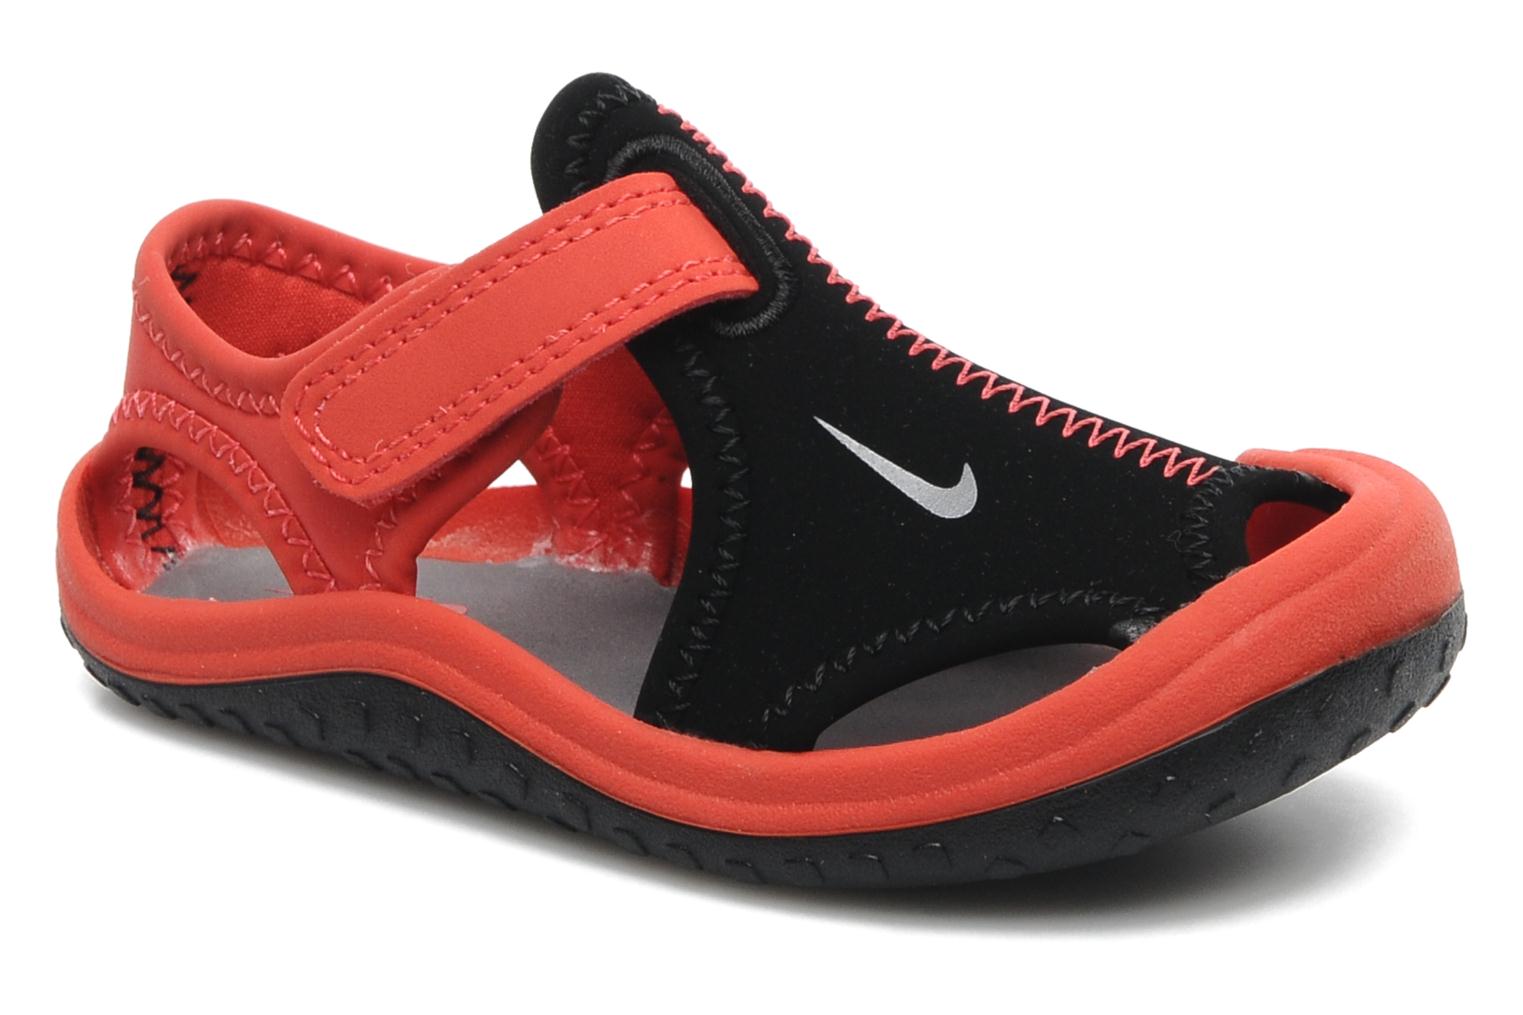 Nike SUNRAY PROTECT (TD) Sport shoes in Black at Sarenza.co.uk (171403)